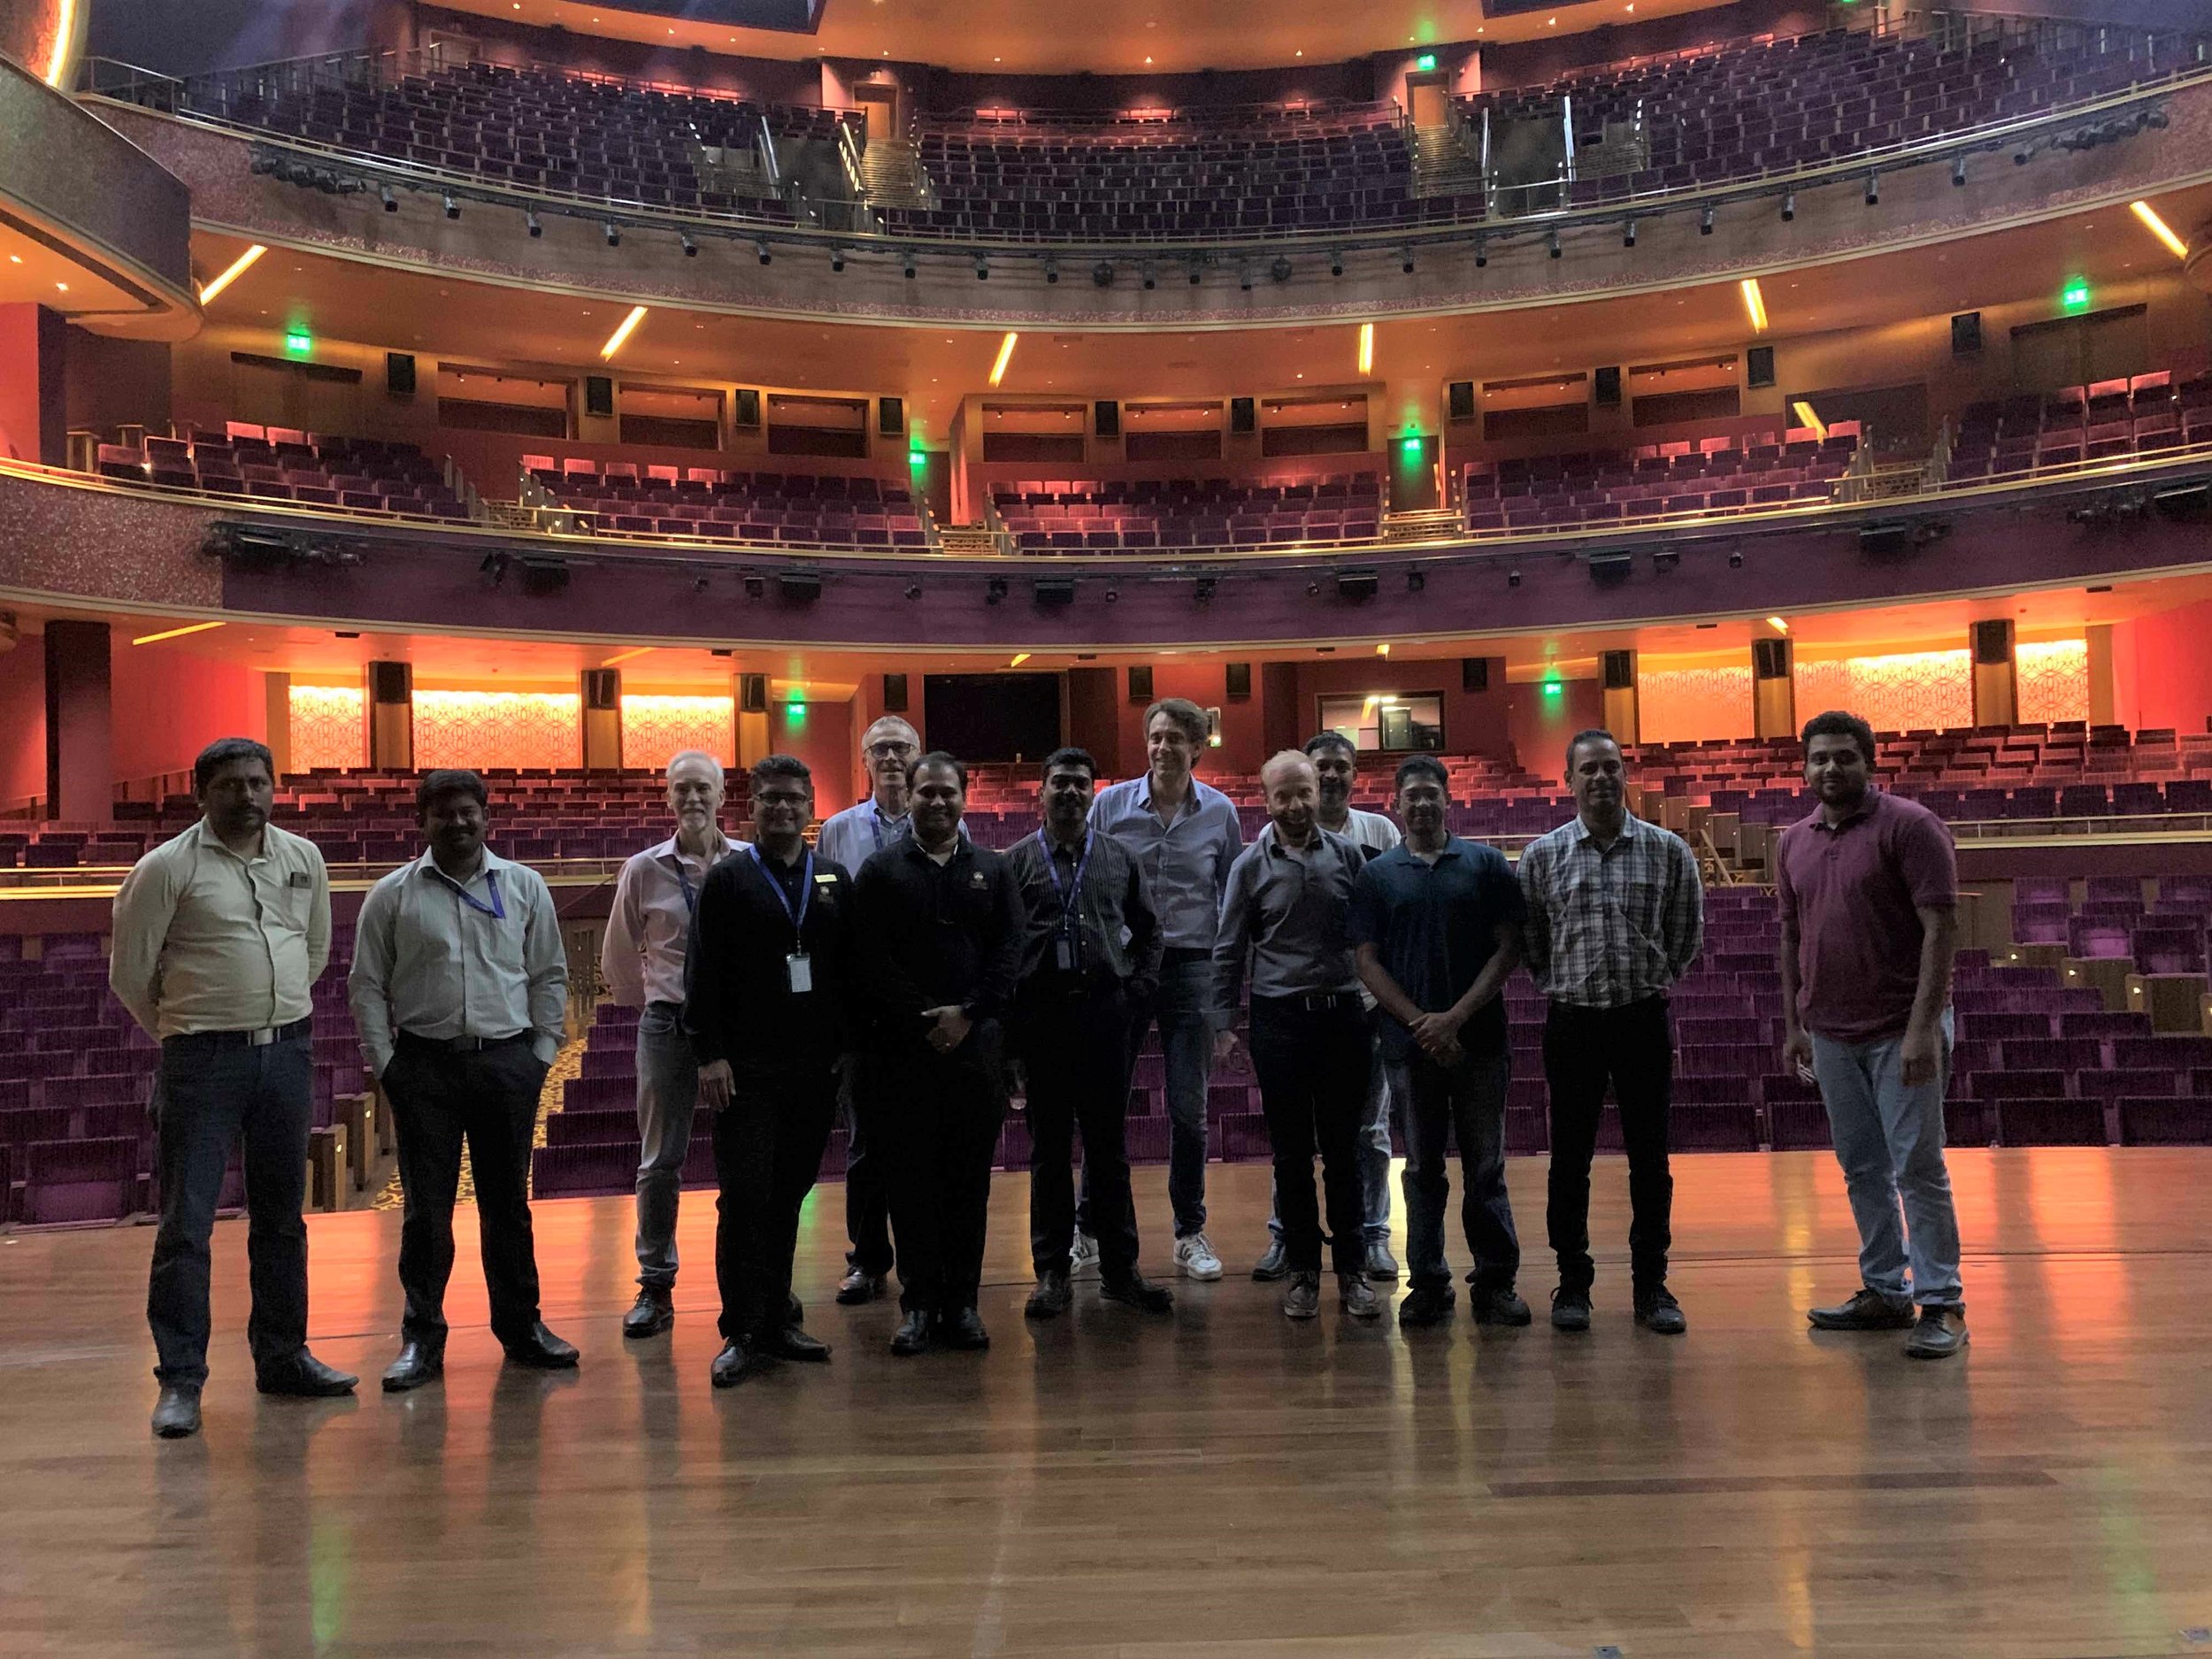 The SIAP and Reliance team together in the concert hall of the JIO World Centre